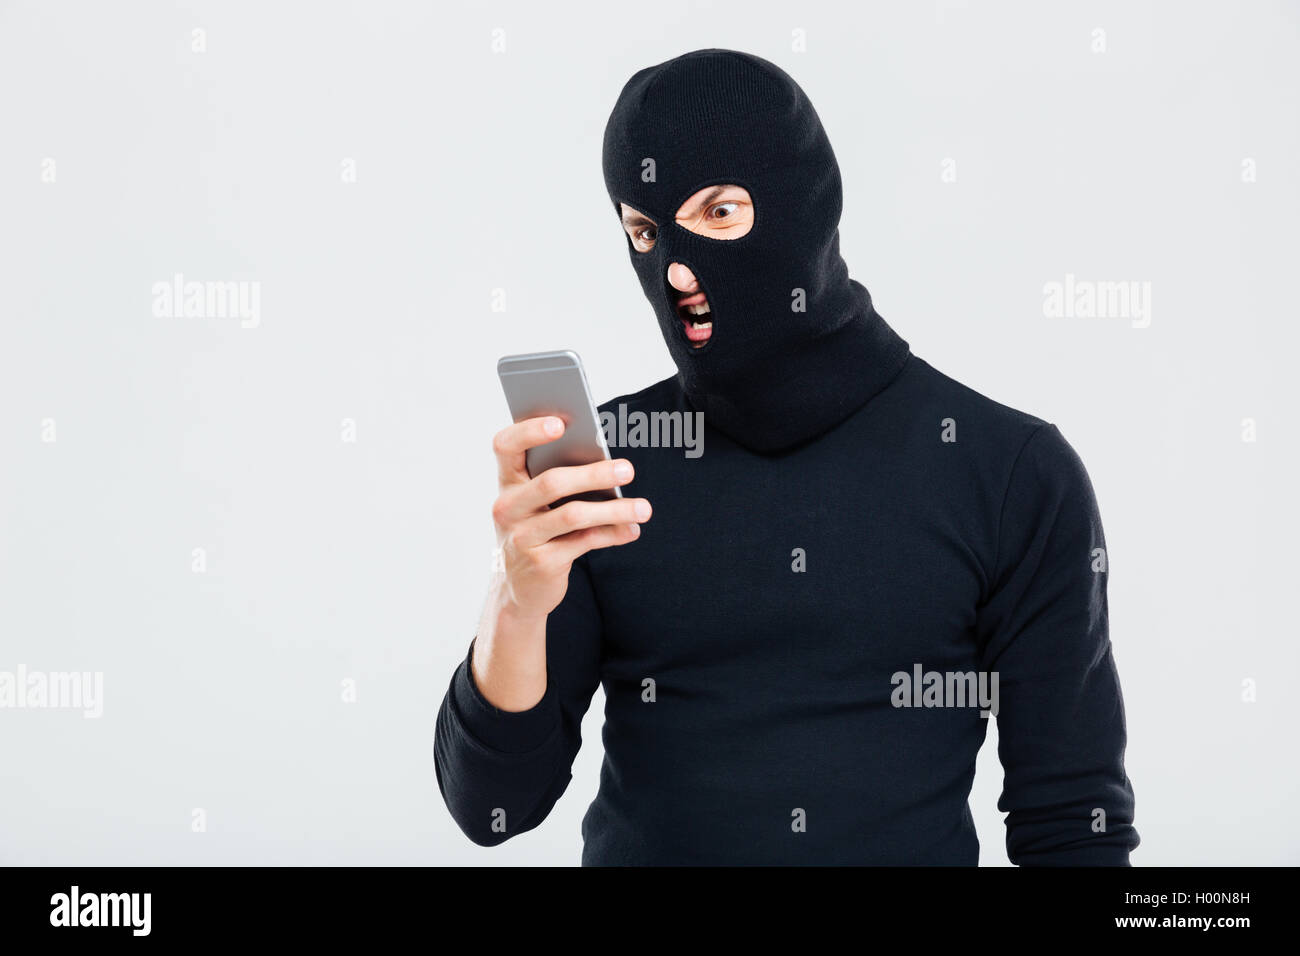 Angry young man in balaclava using cell phone Stock Photo